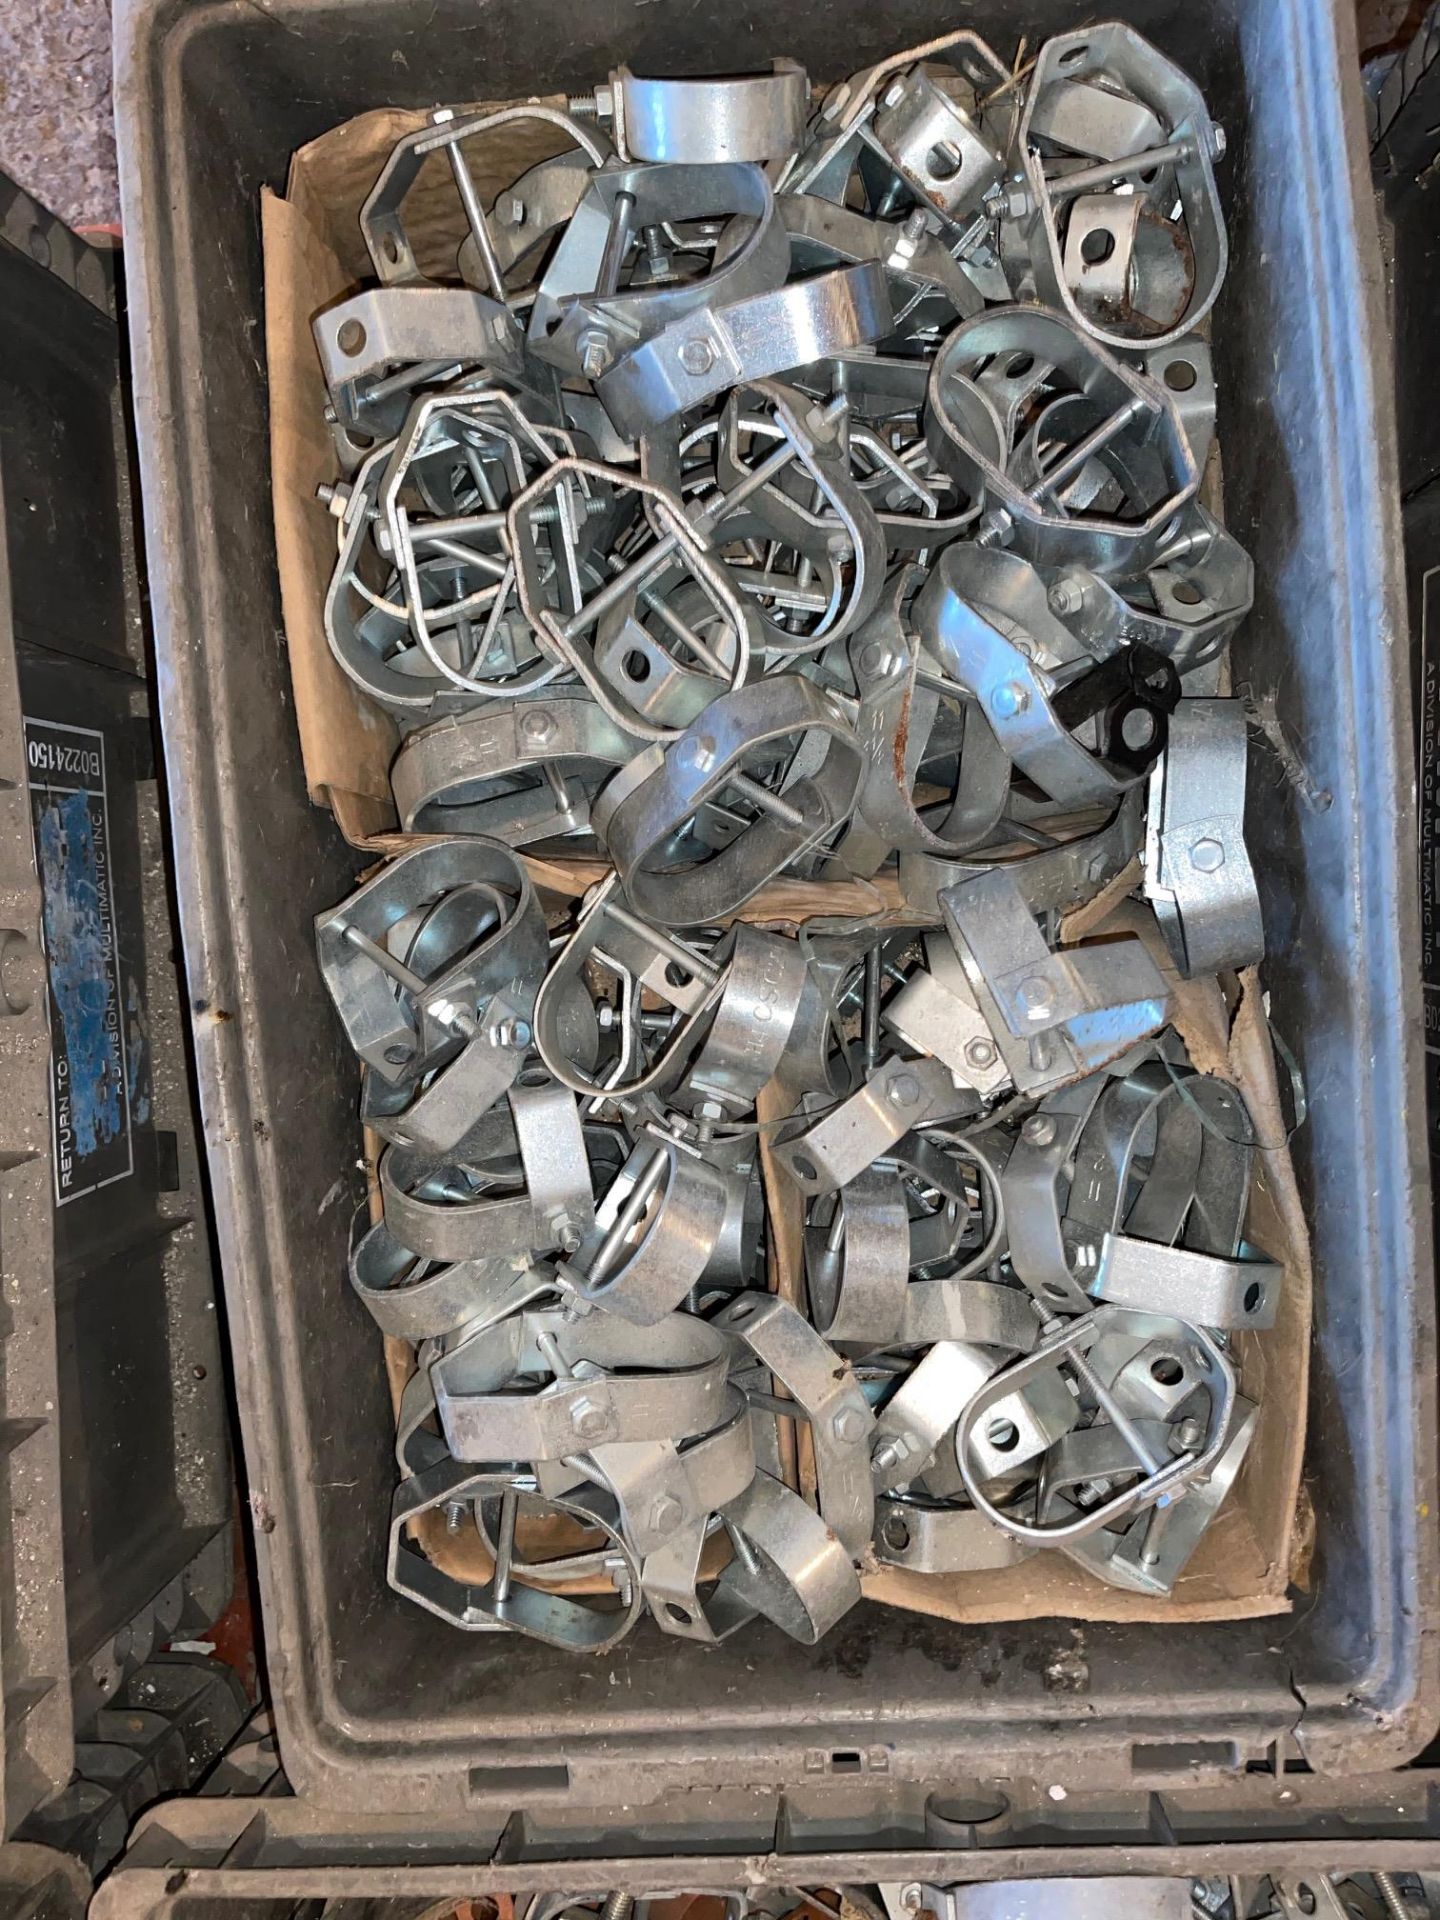 LOT OF ASSORTMENT OF PIPE HANGERS, .5" TO 3" PIPE, GALVANIZE, PAINTED 1" U-BOLTS TO 4” U-BOLTS - Image 4 of 6